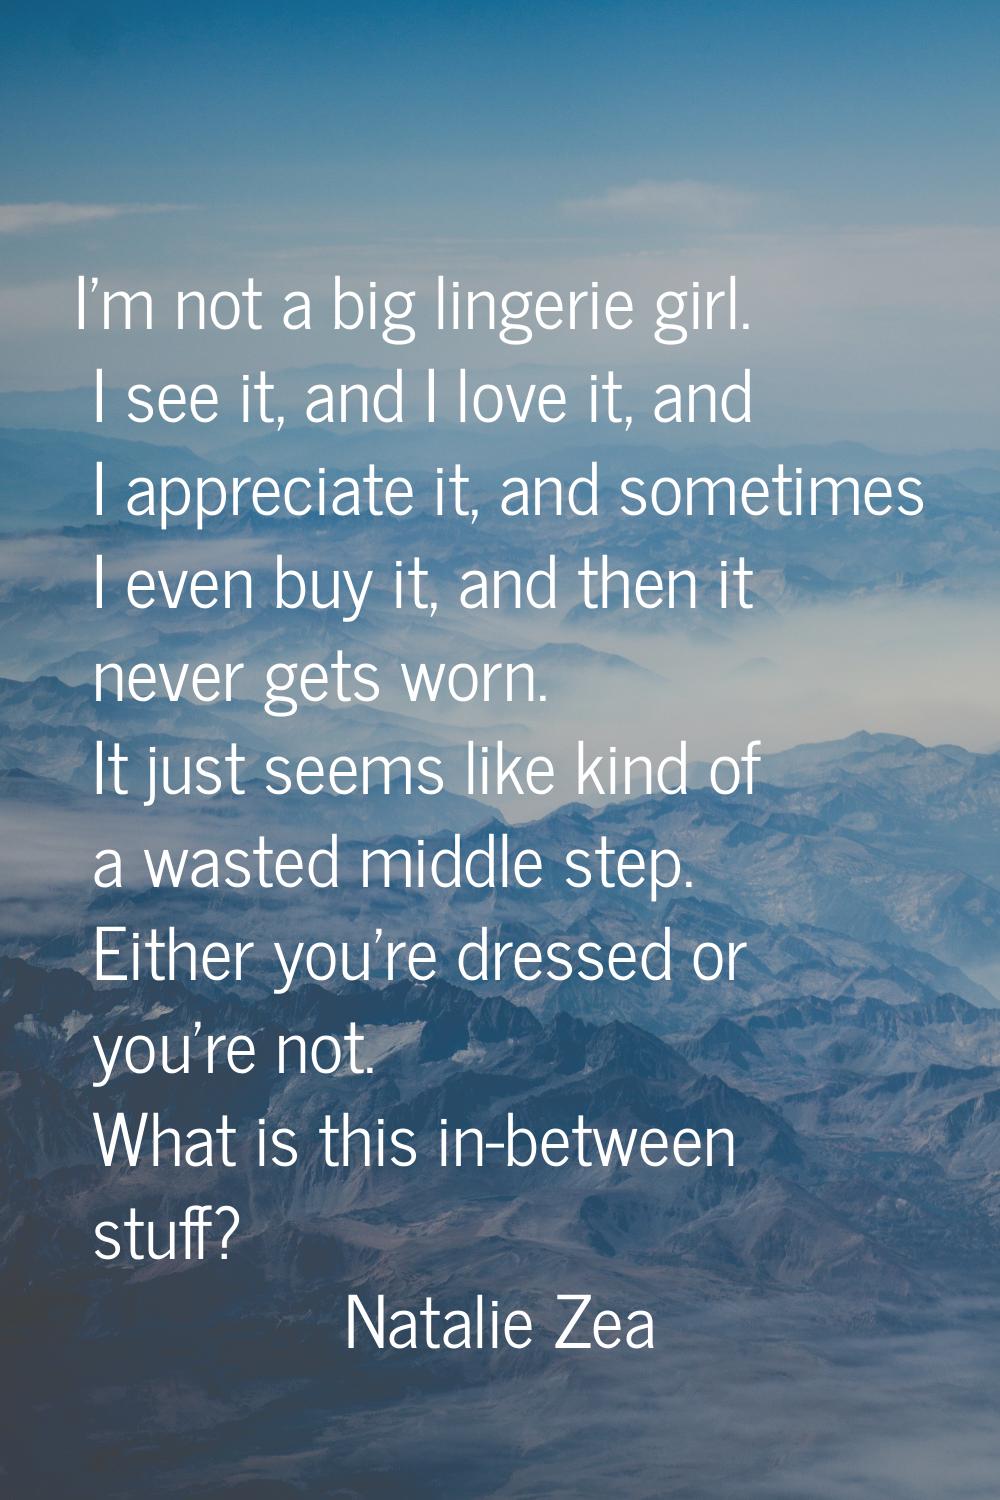 I'm not a big lingerie girl. I see it, and I love it, and I appreciate it, and sometimes I even buy